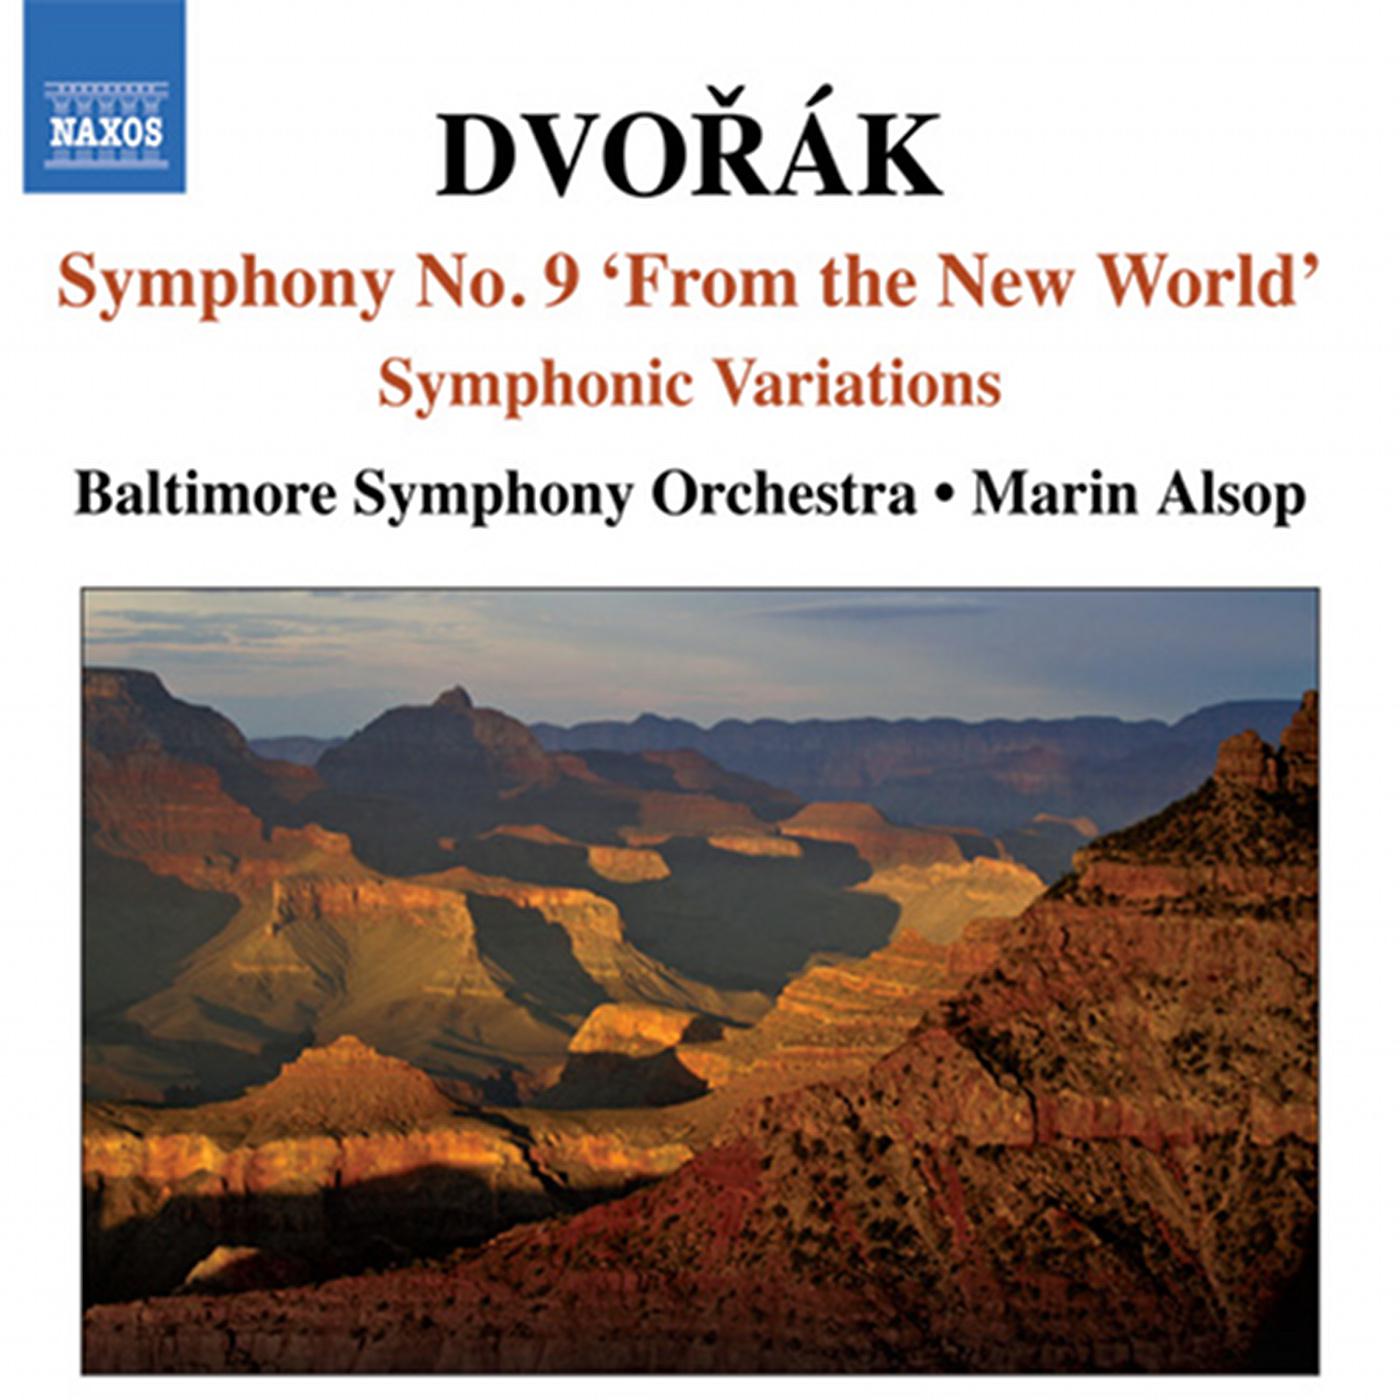 Symphony No. 9 in E Minor, Op. 95, B. 178, "From the New World":IV. Allegro con fuoco